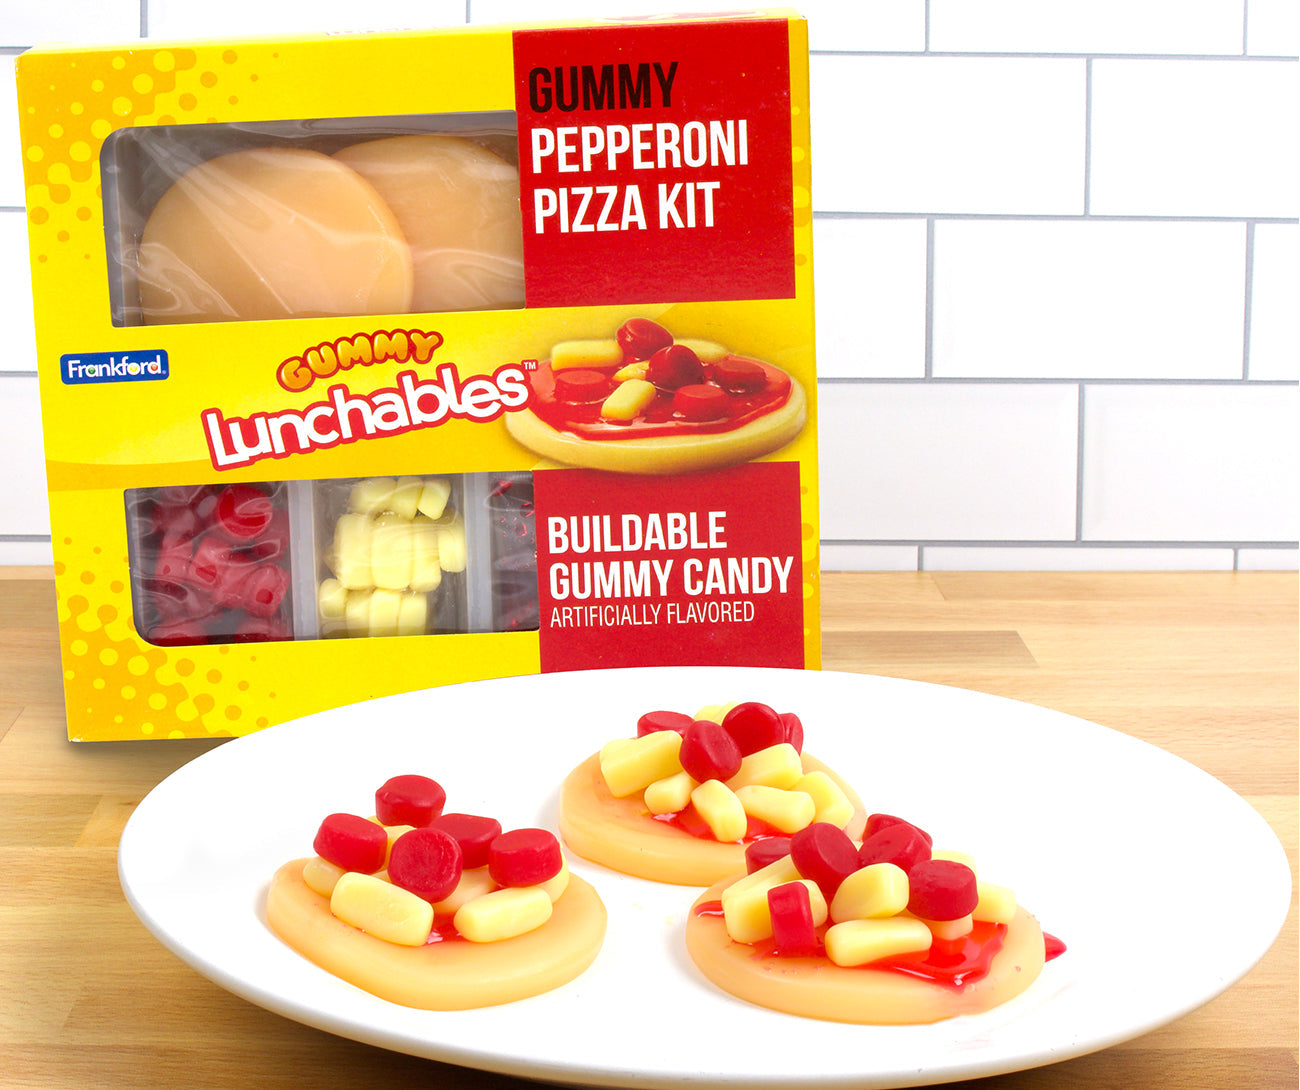 Yellow lunchables box with plate of round gummy pizzas